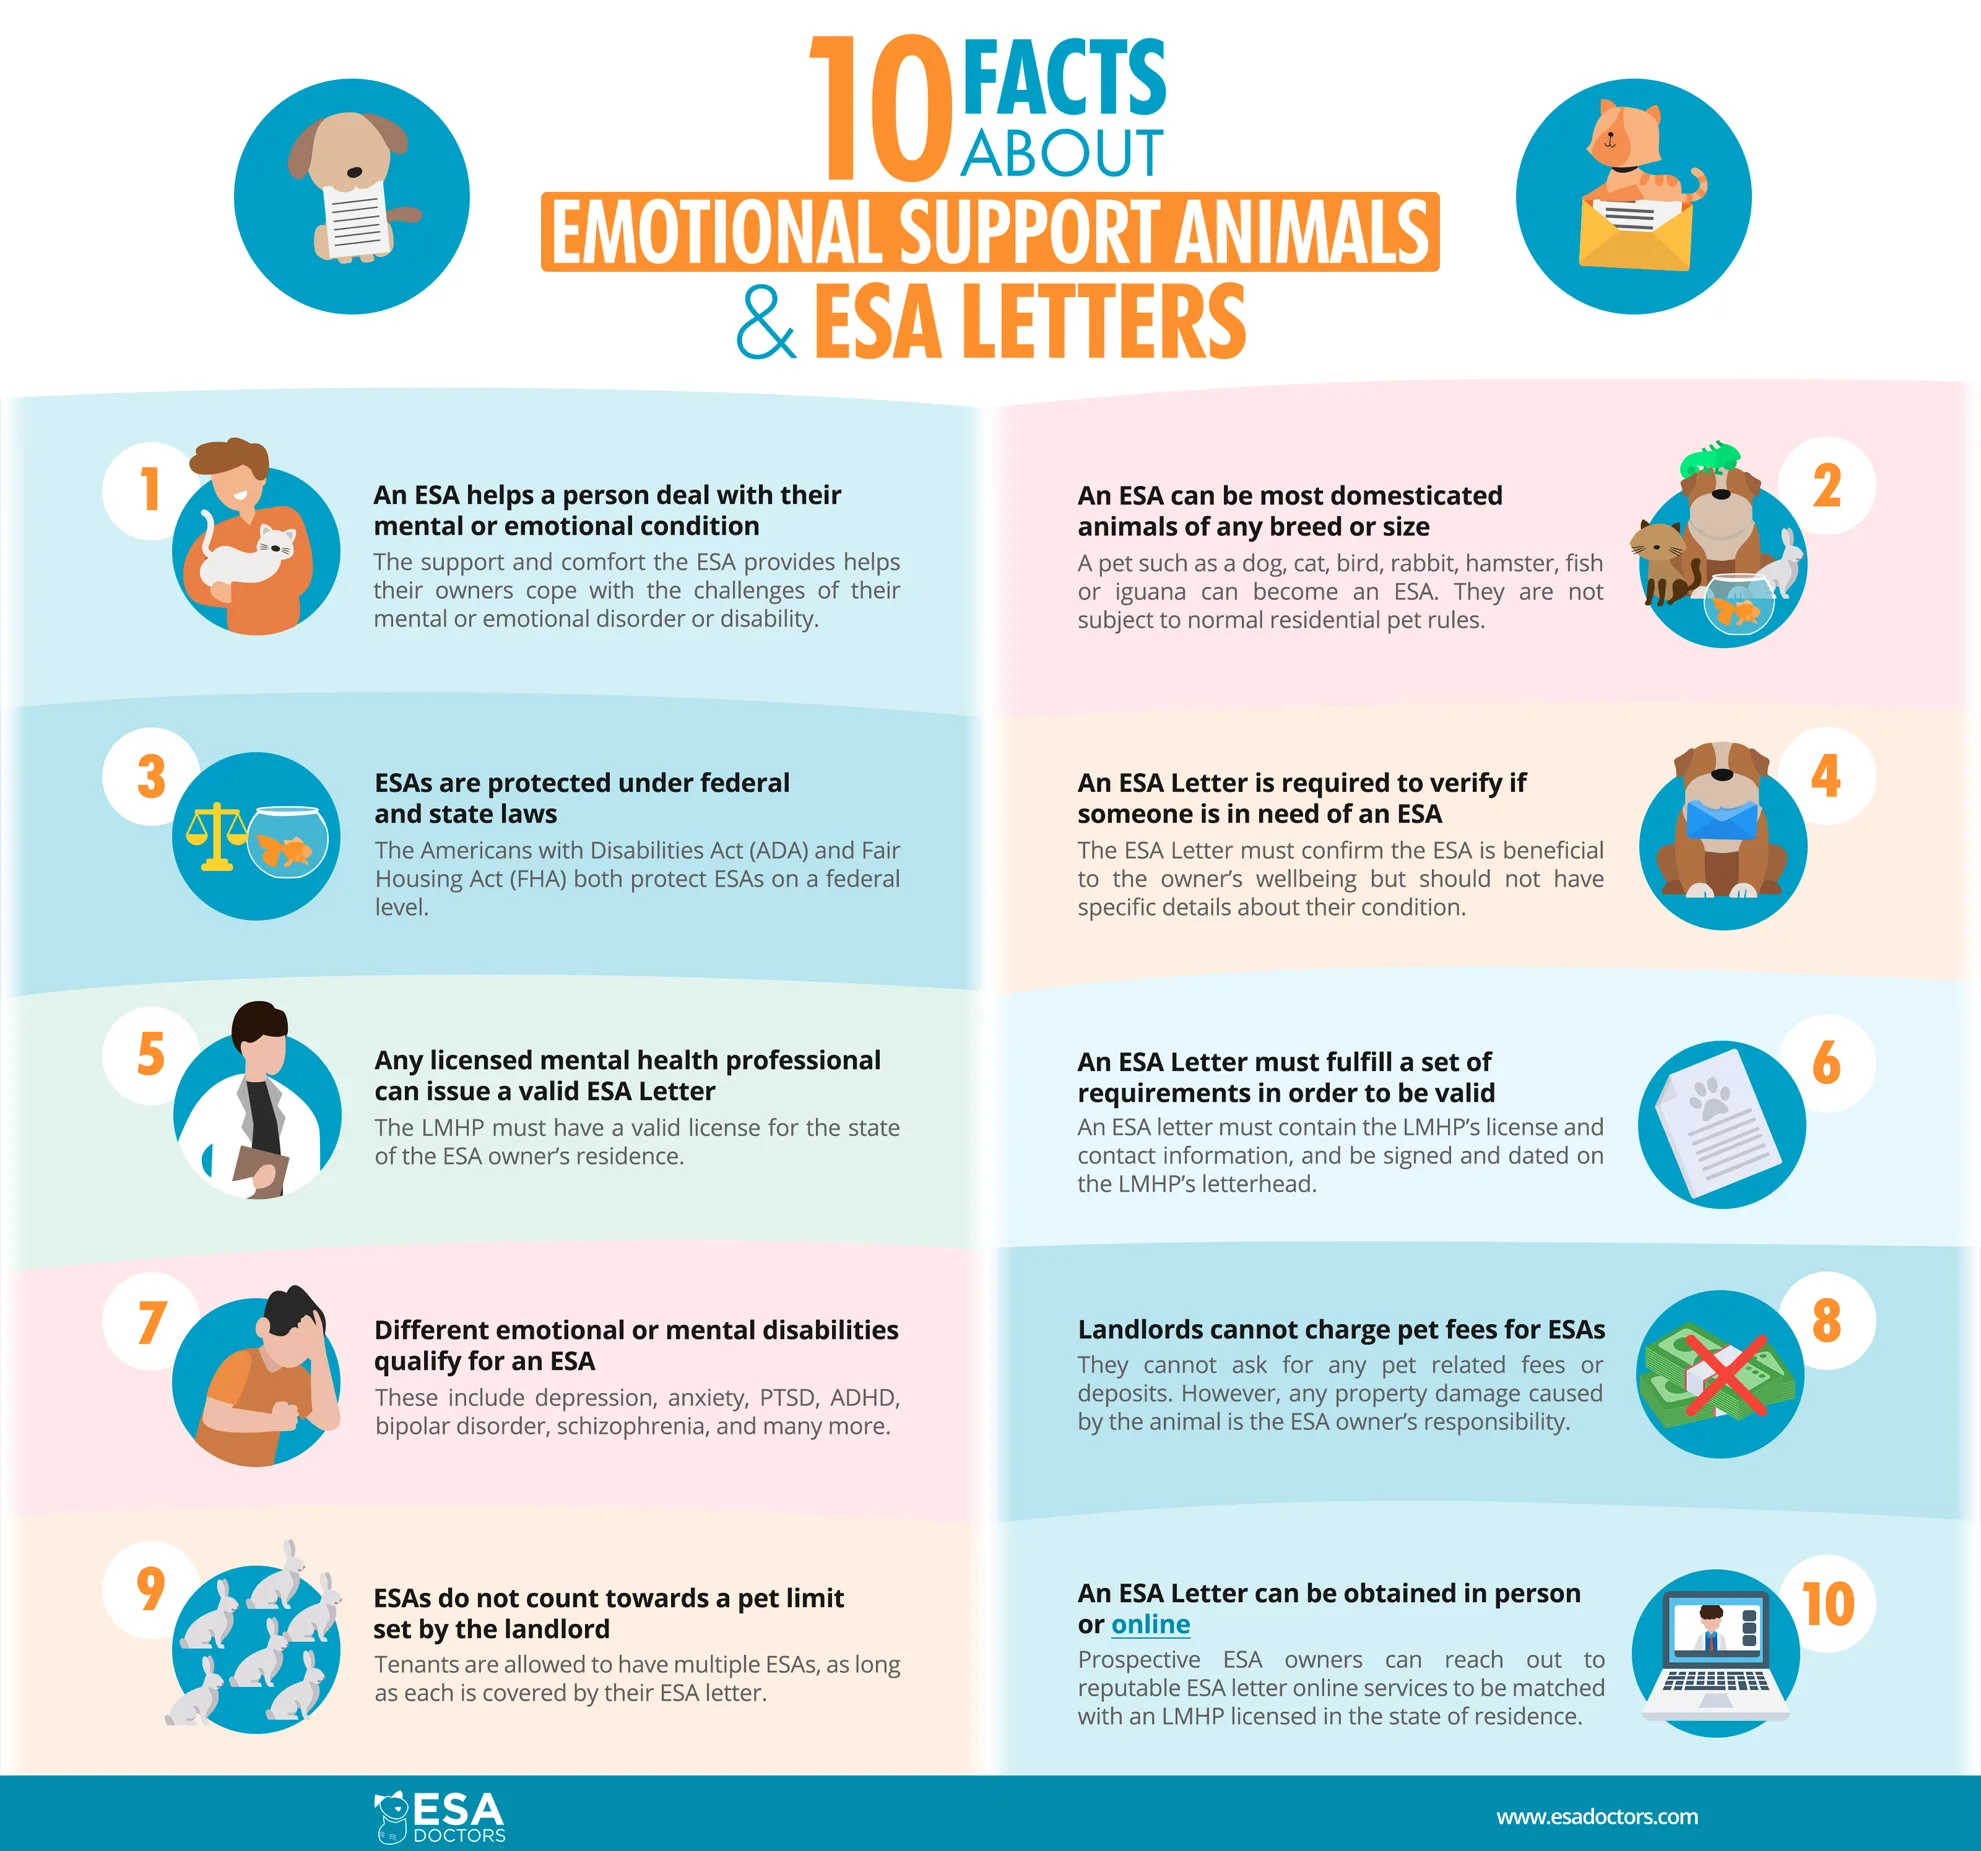 10 Facts about ESA and ESA Letters - Infographic - ESA Doctors